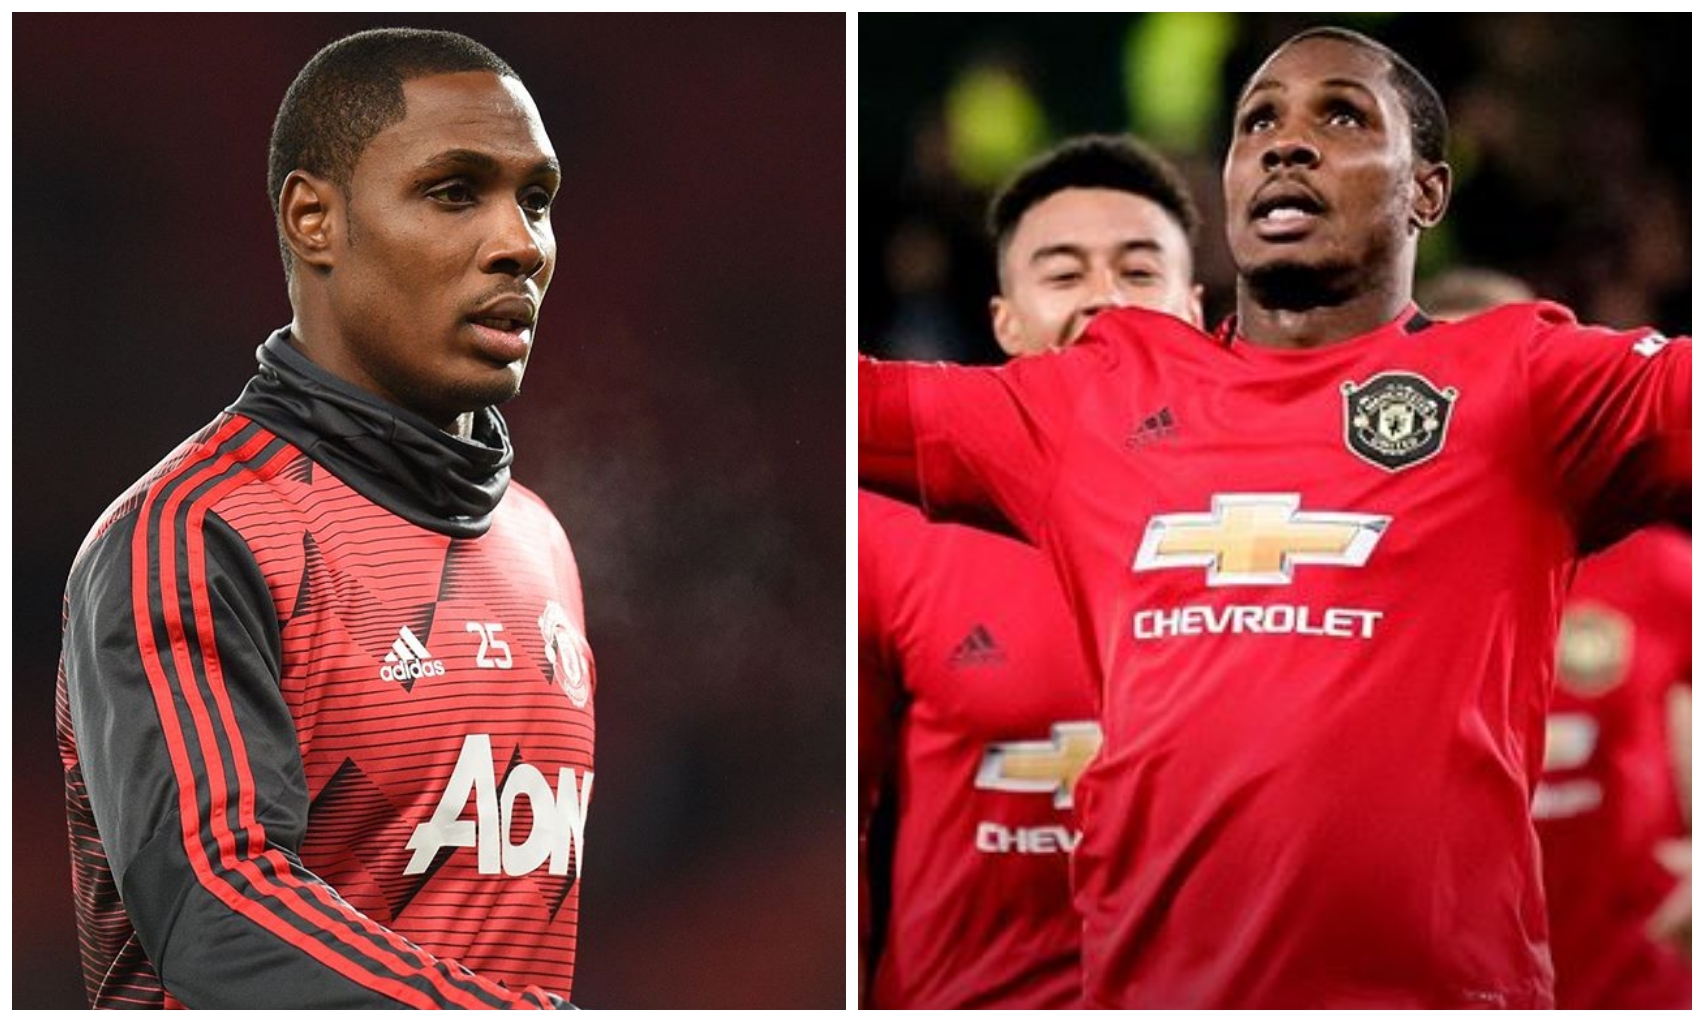 BREAKING: Odion Ighalo extend loan deal at Manchester United until January 2021